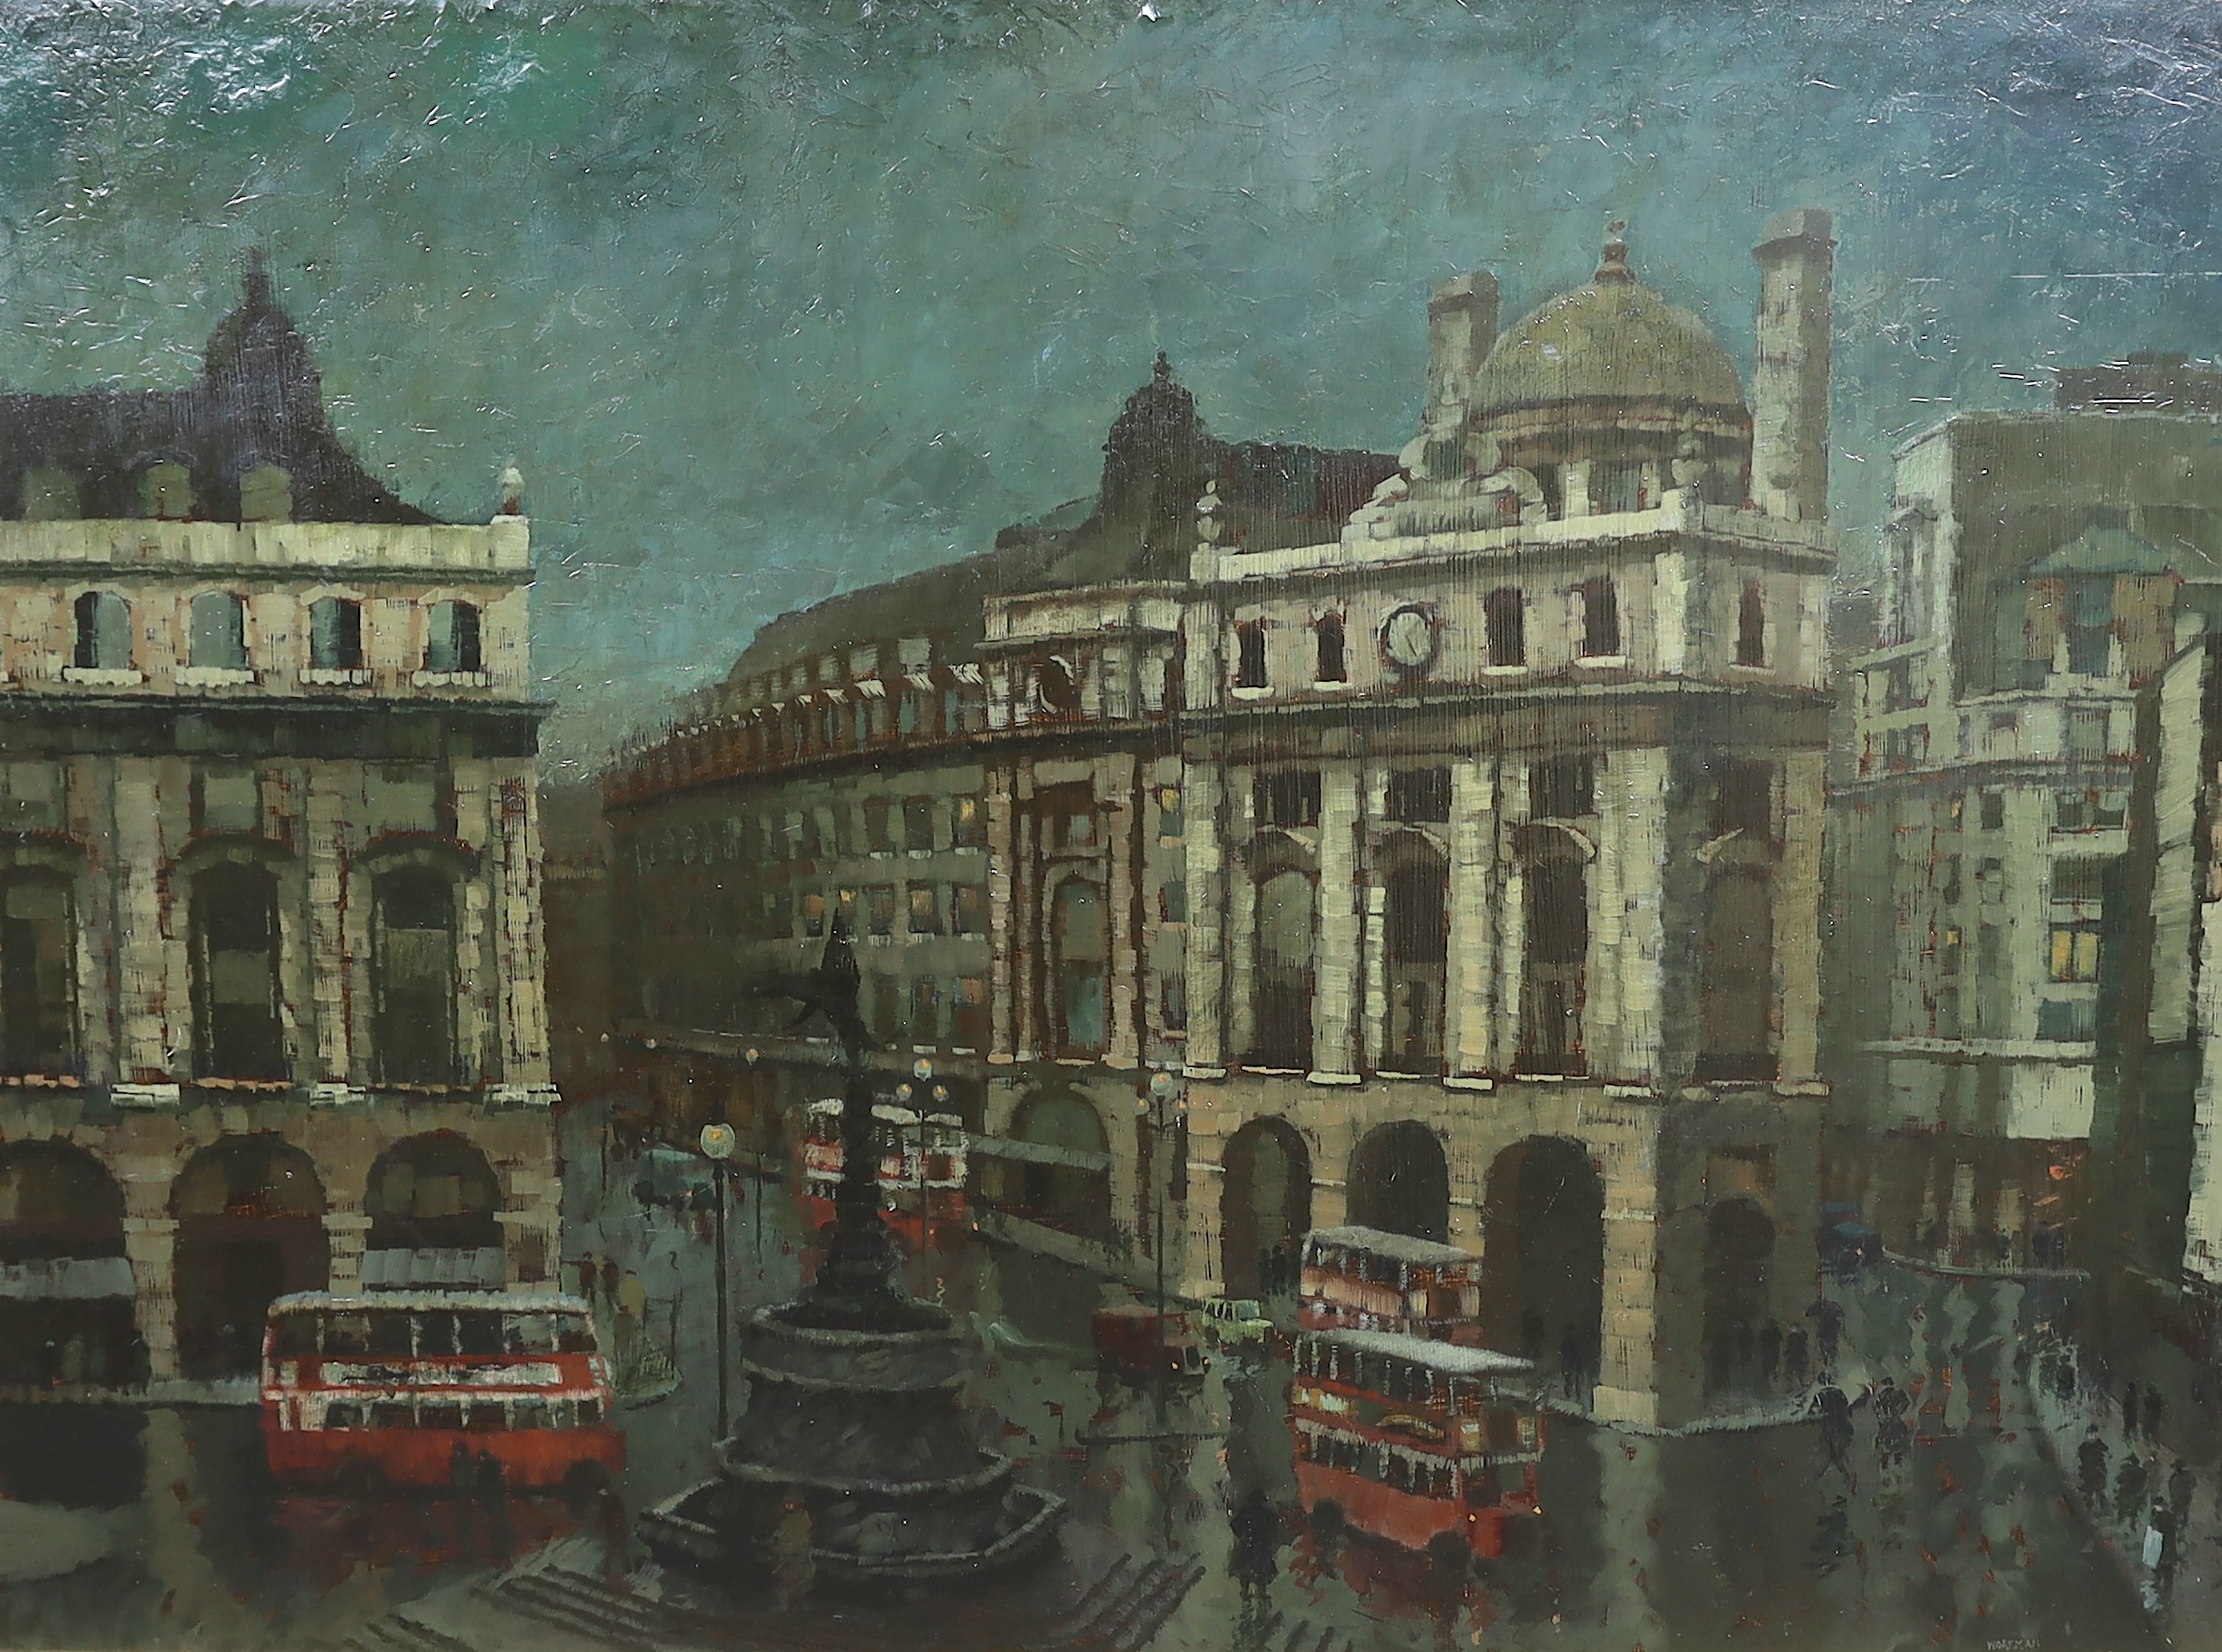 Harold Workman (English, 1897-1975), 'Nocturnal view of Piccadilly Circus', oil on board, 72 x 99cm